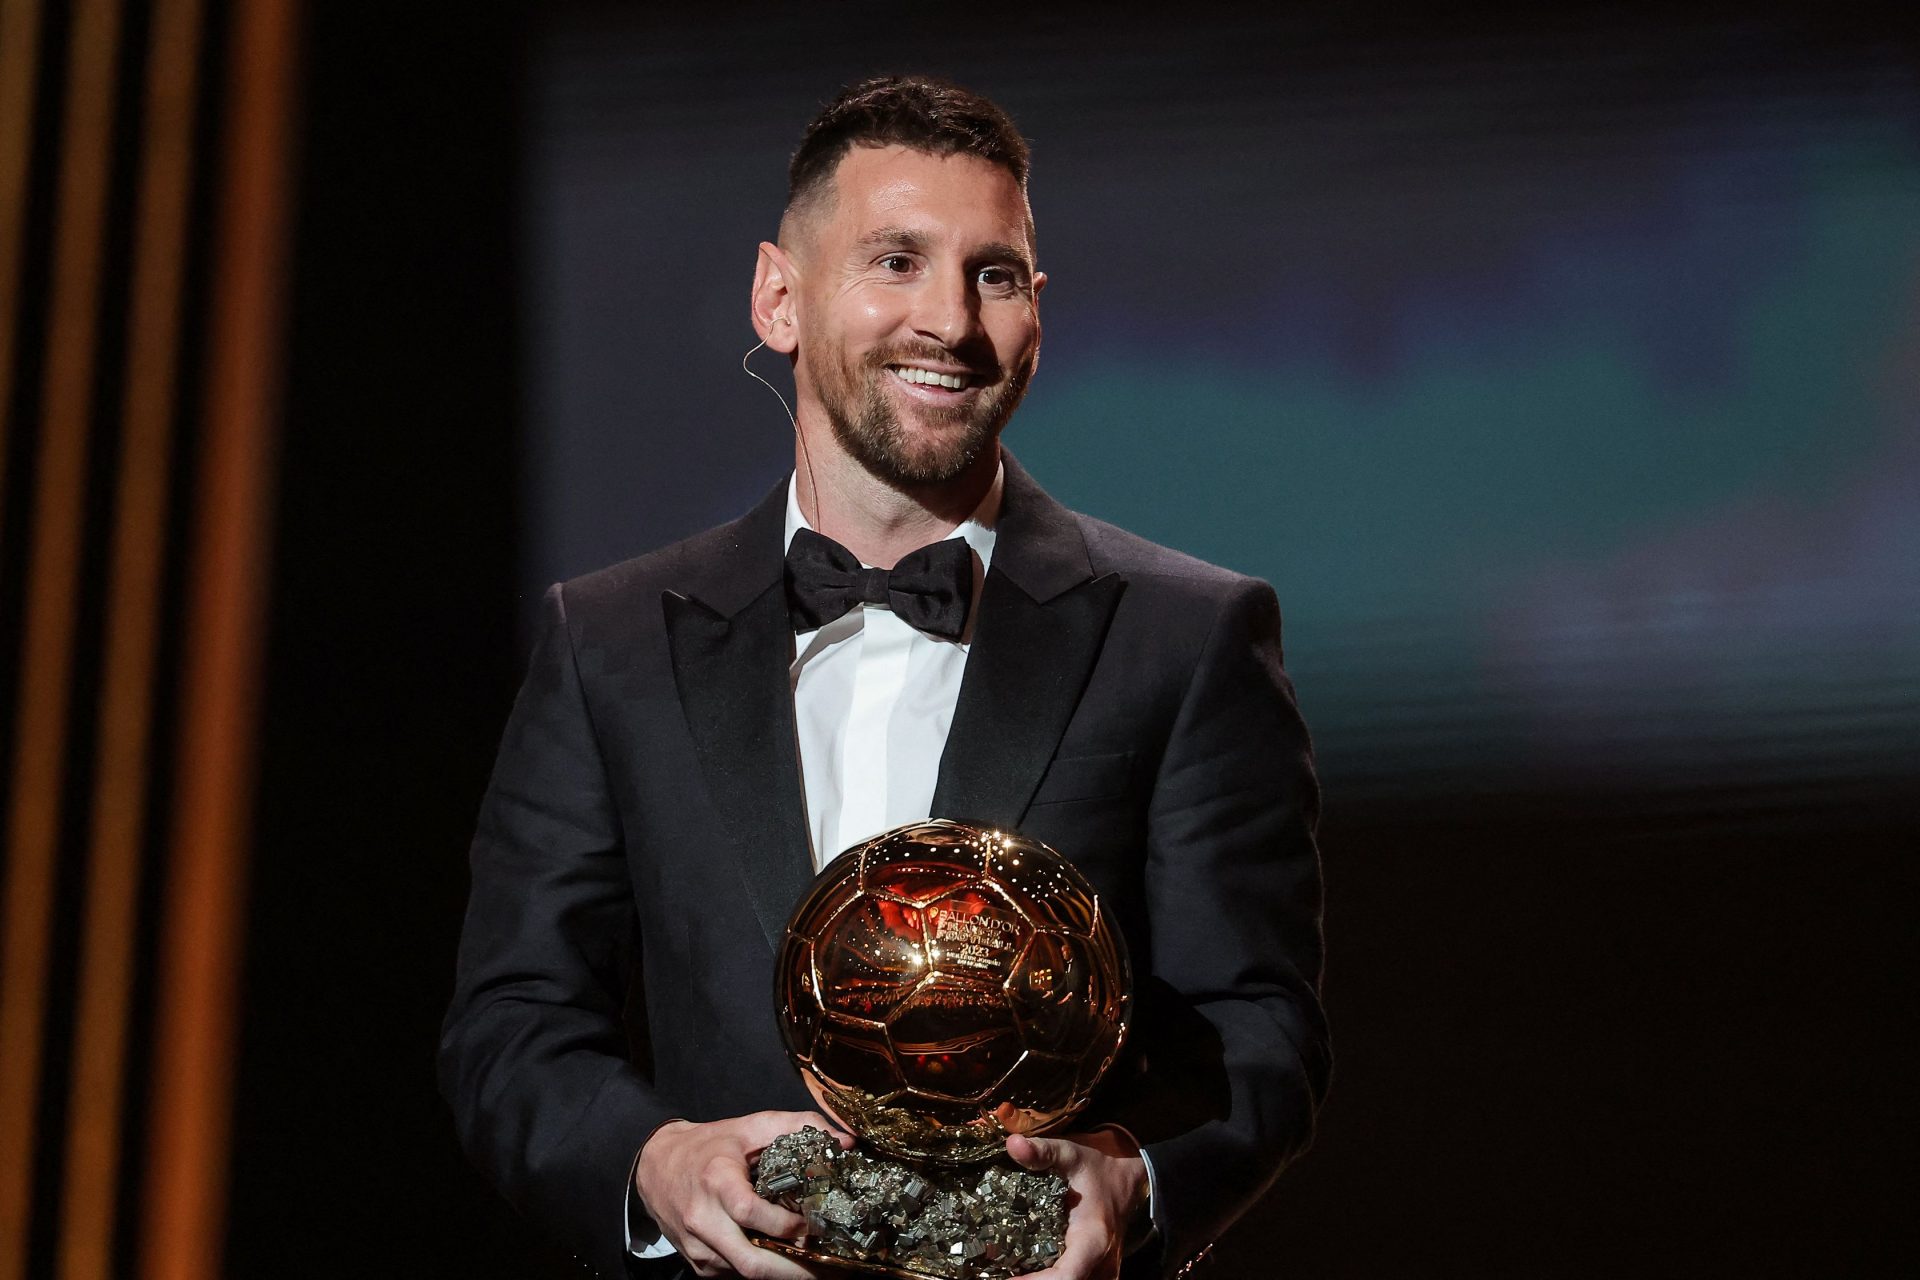 PSG accused of influencing Lionel Messi's 2021 Ballon d'Or win